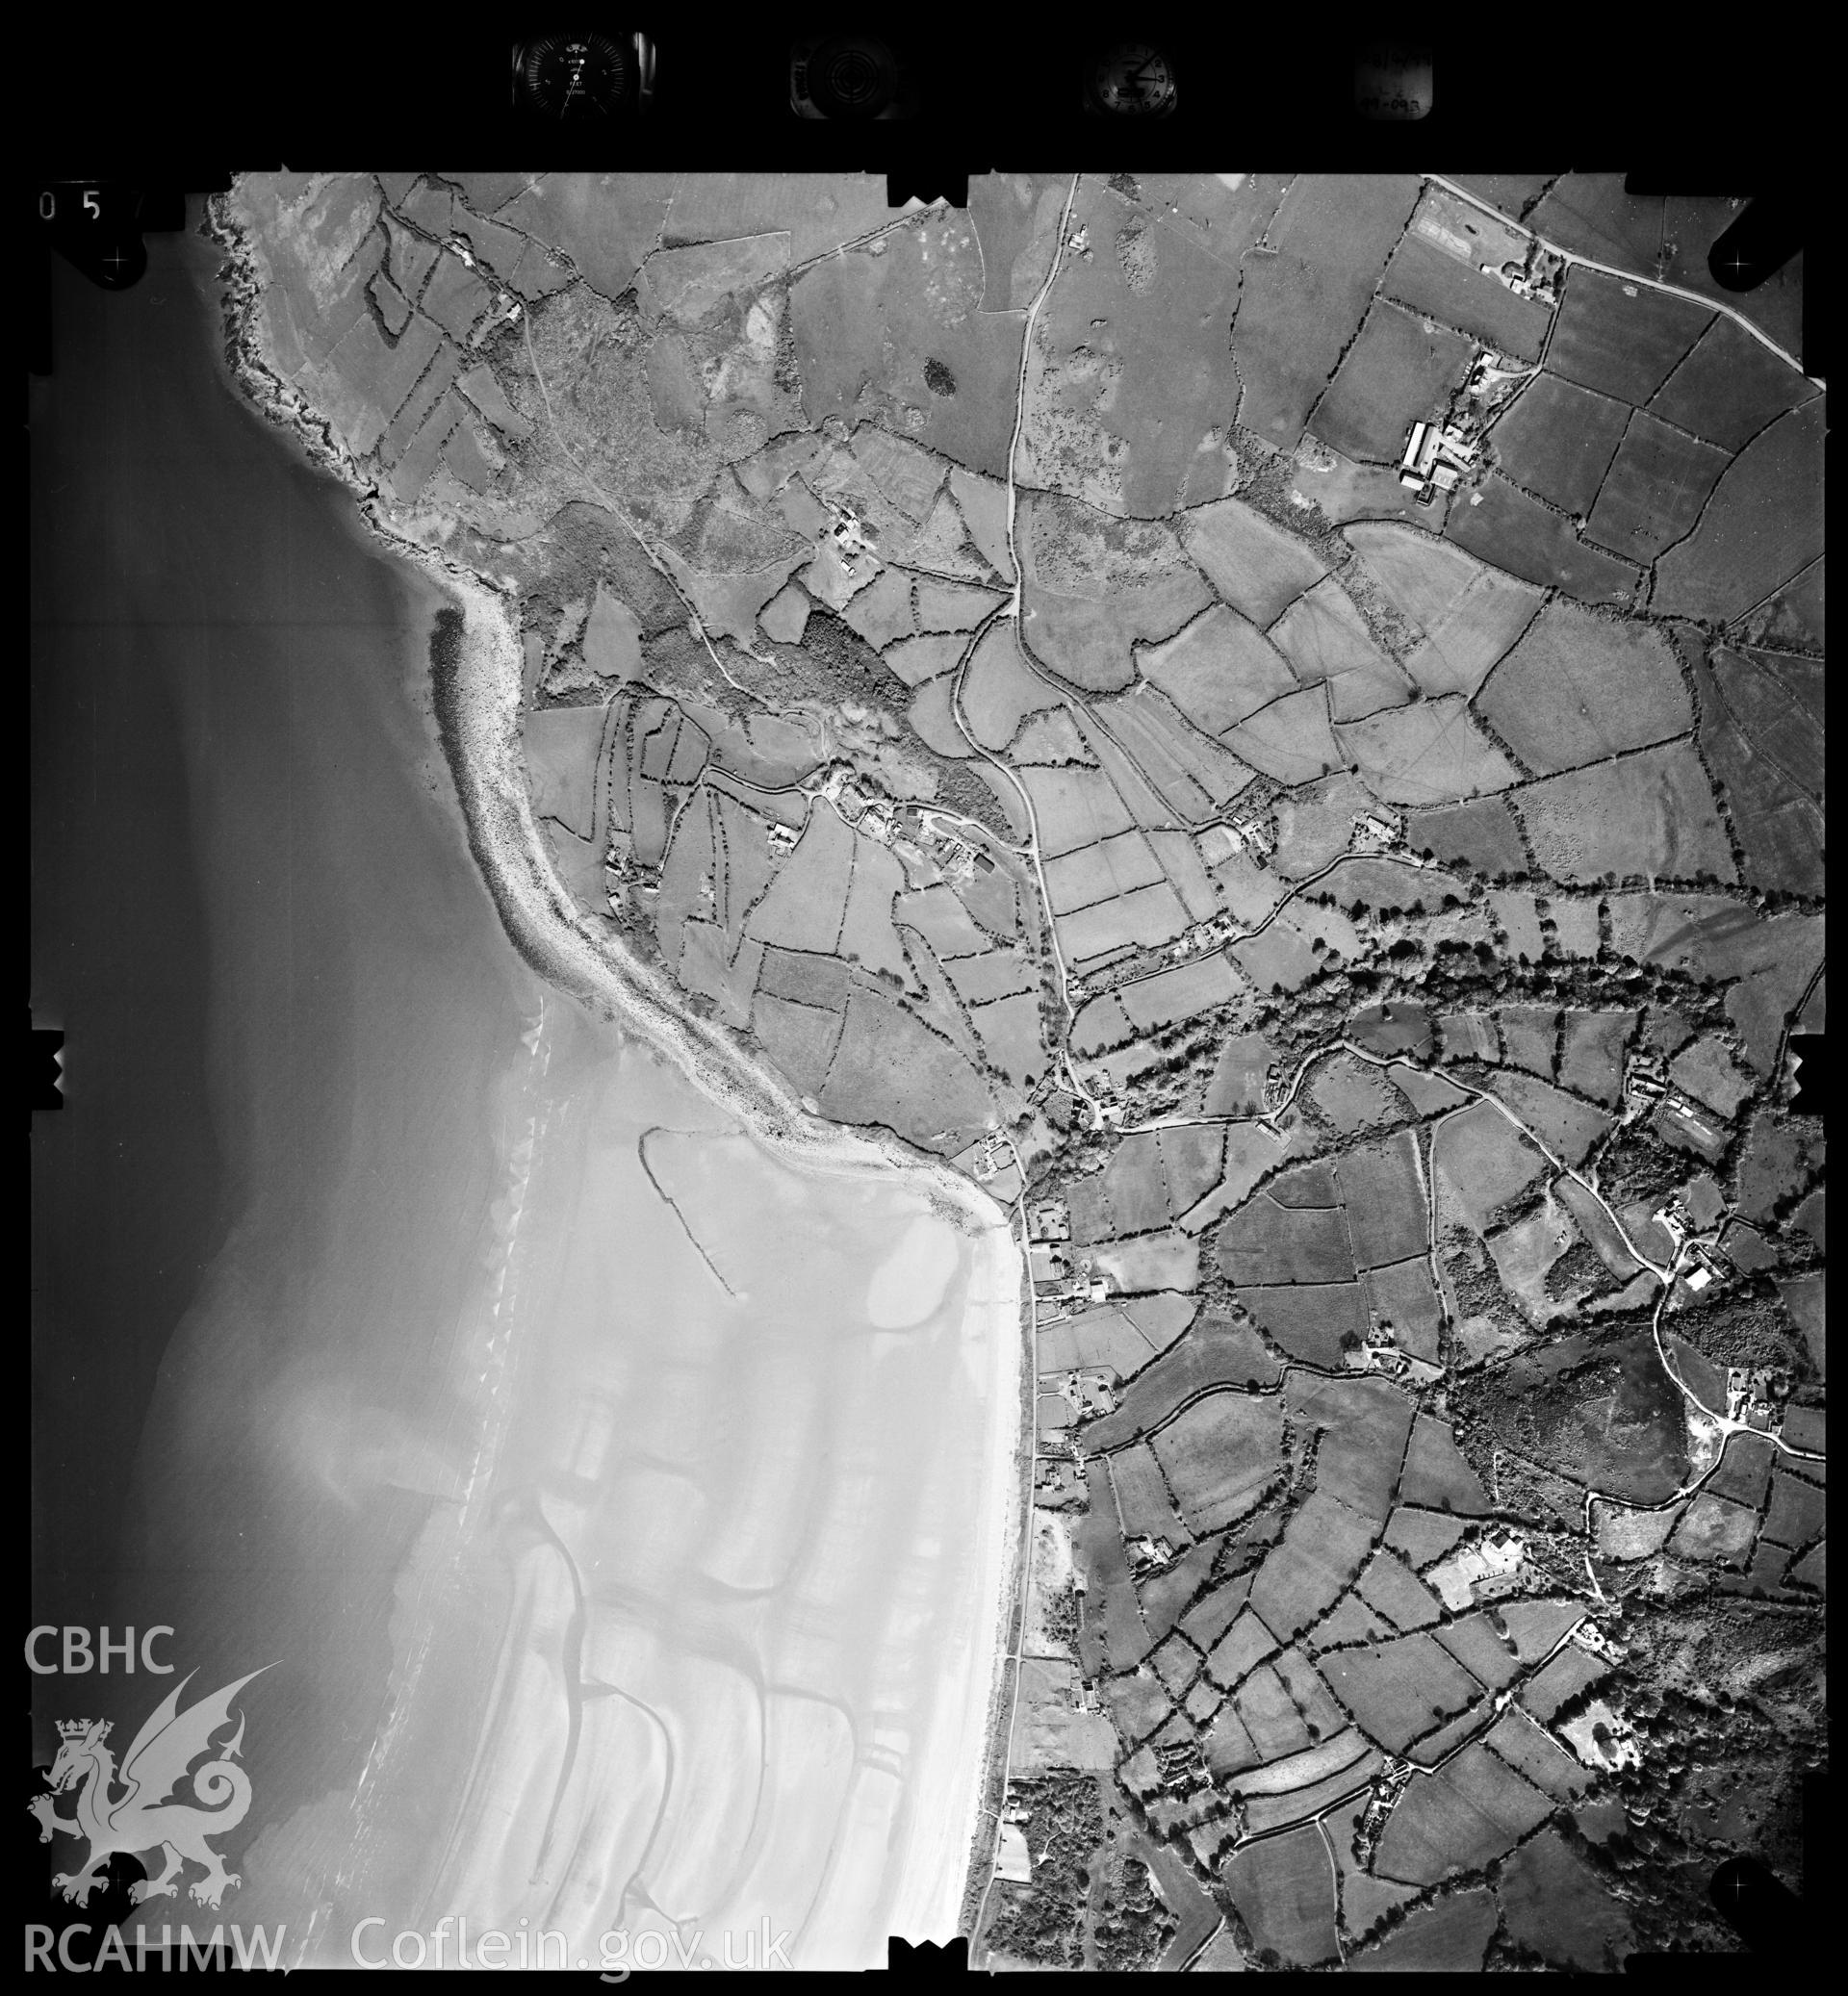 Digitized copy of an aerial photograph showing the Pentrellwyn area on Anglesey, taken by Ordnance Survey, 1999.